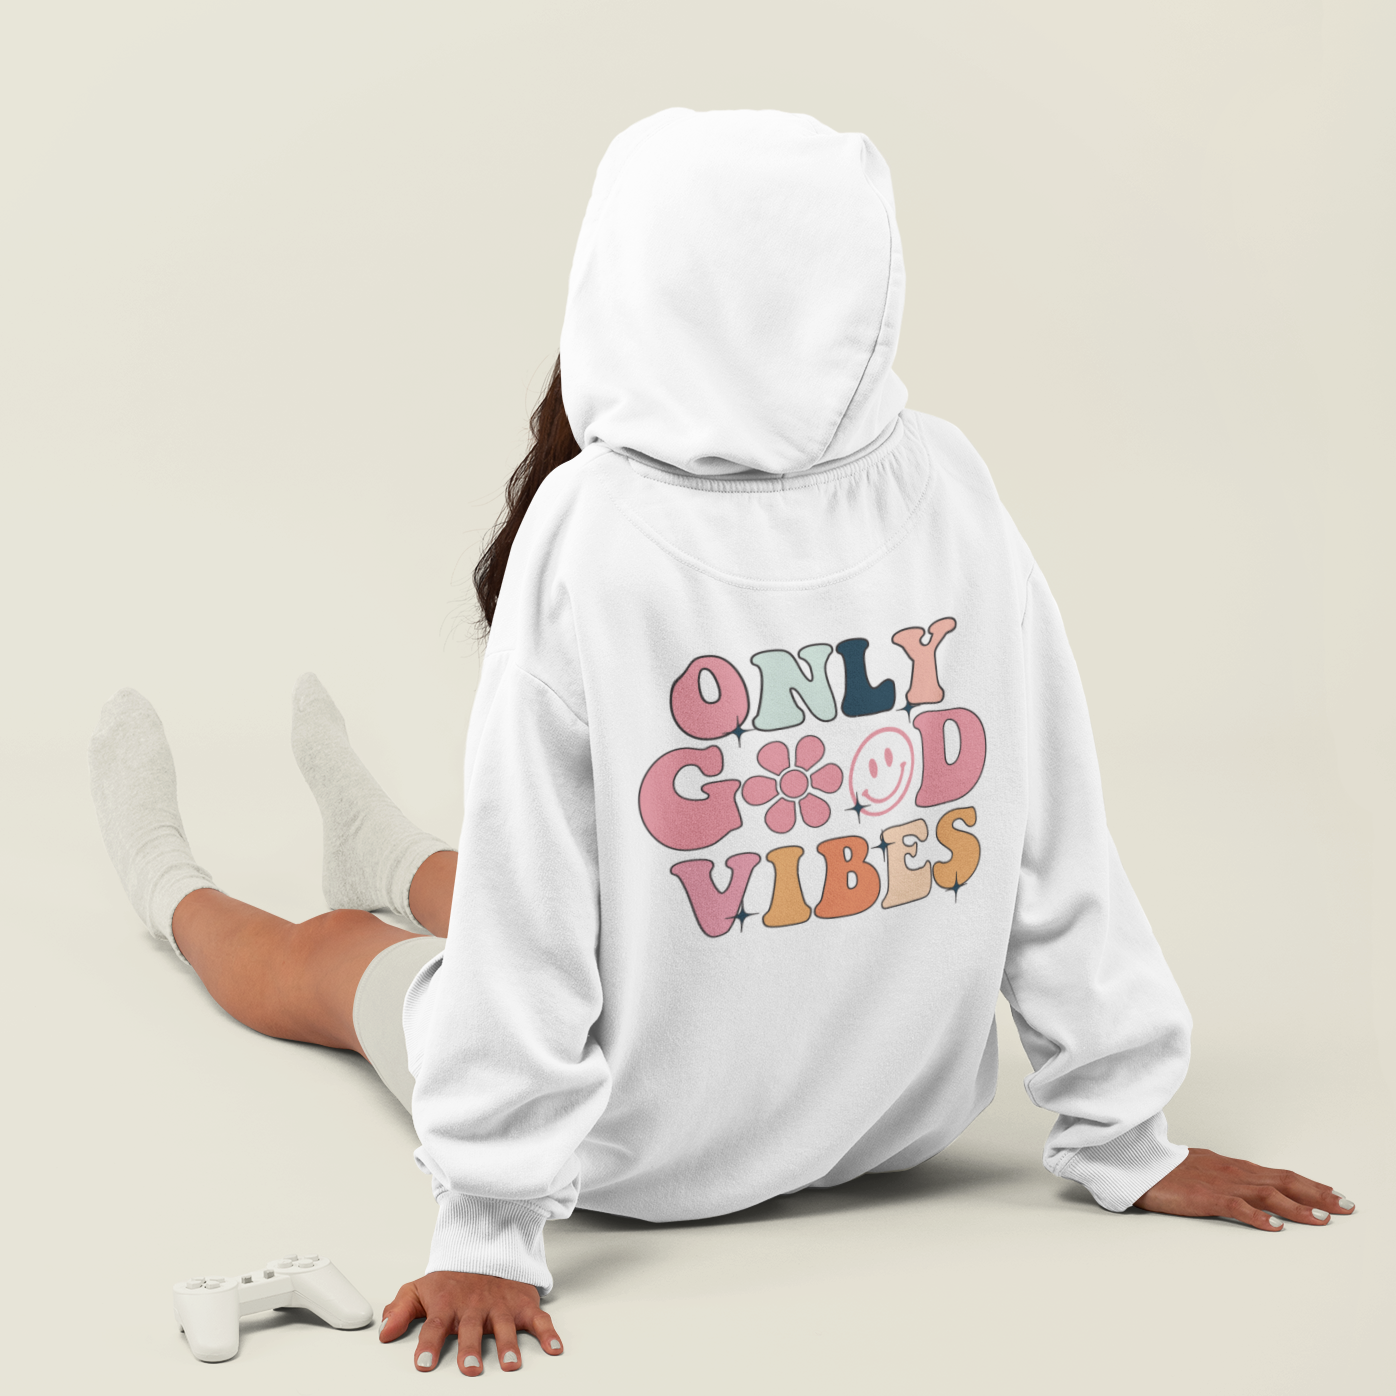 Only Good Vibes- Full Color Heat Transfer